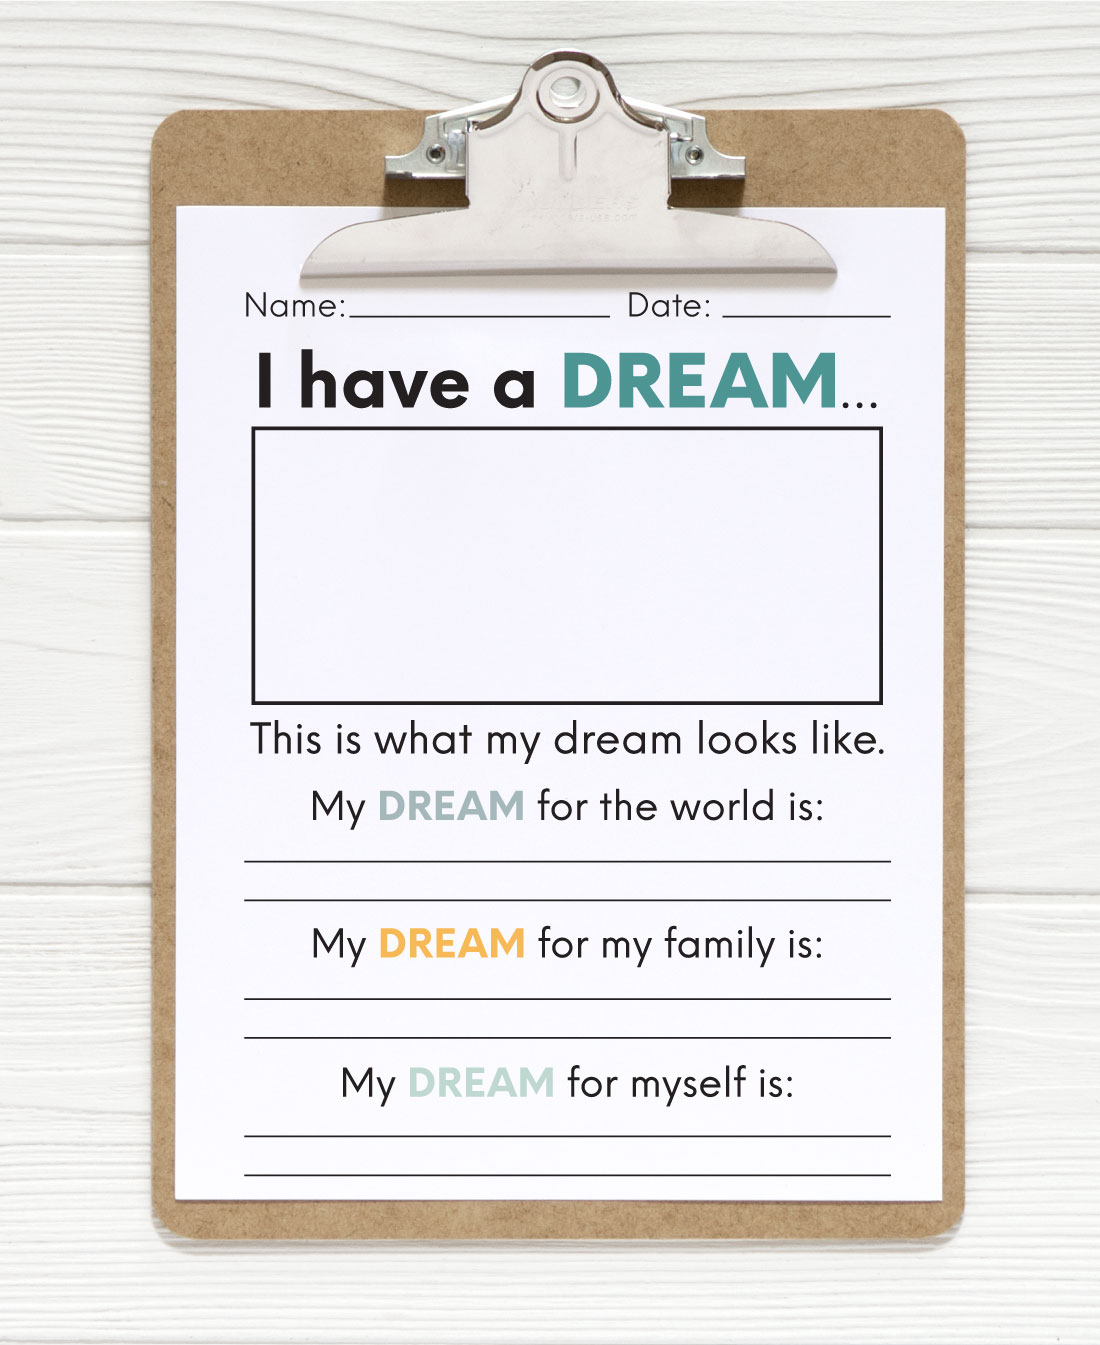 I have a dream - Martin Luther King Jr printable